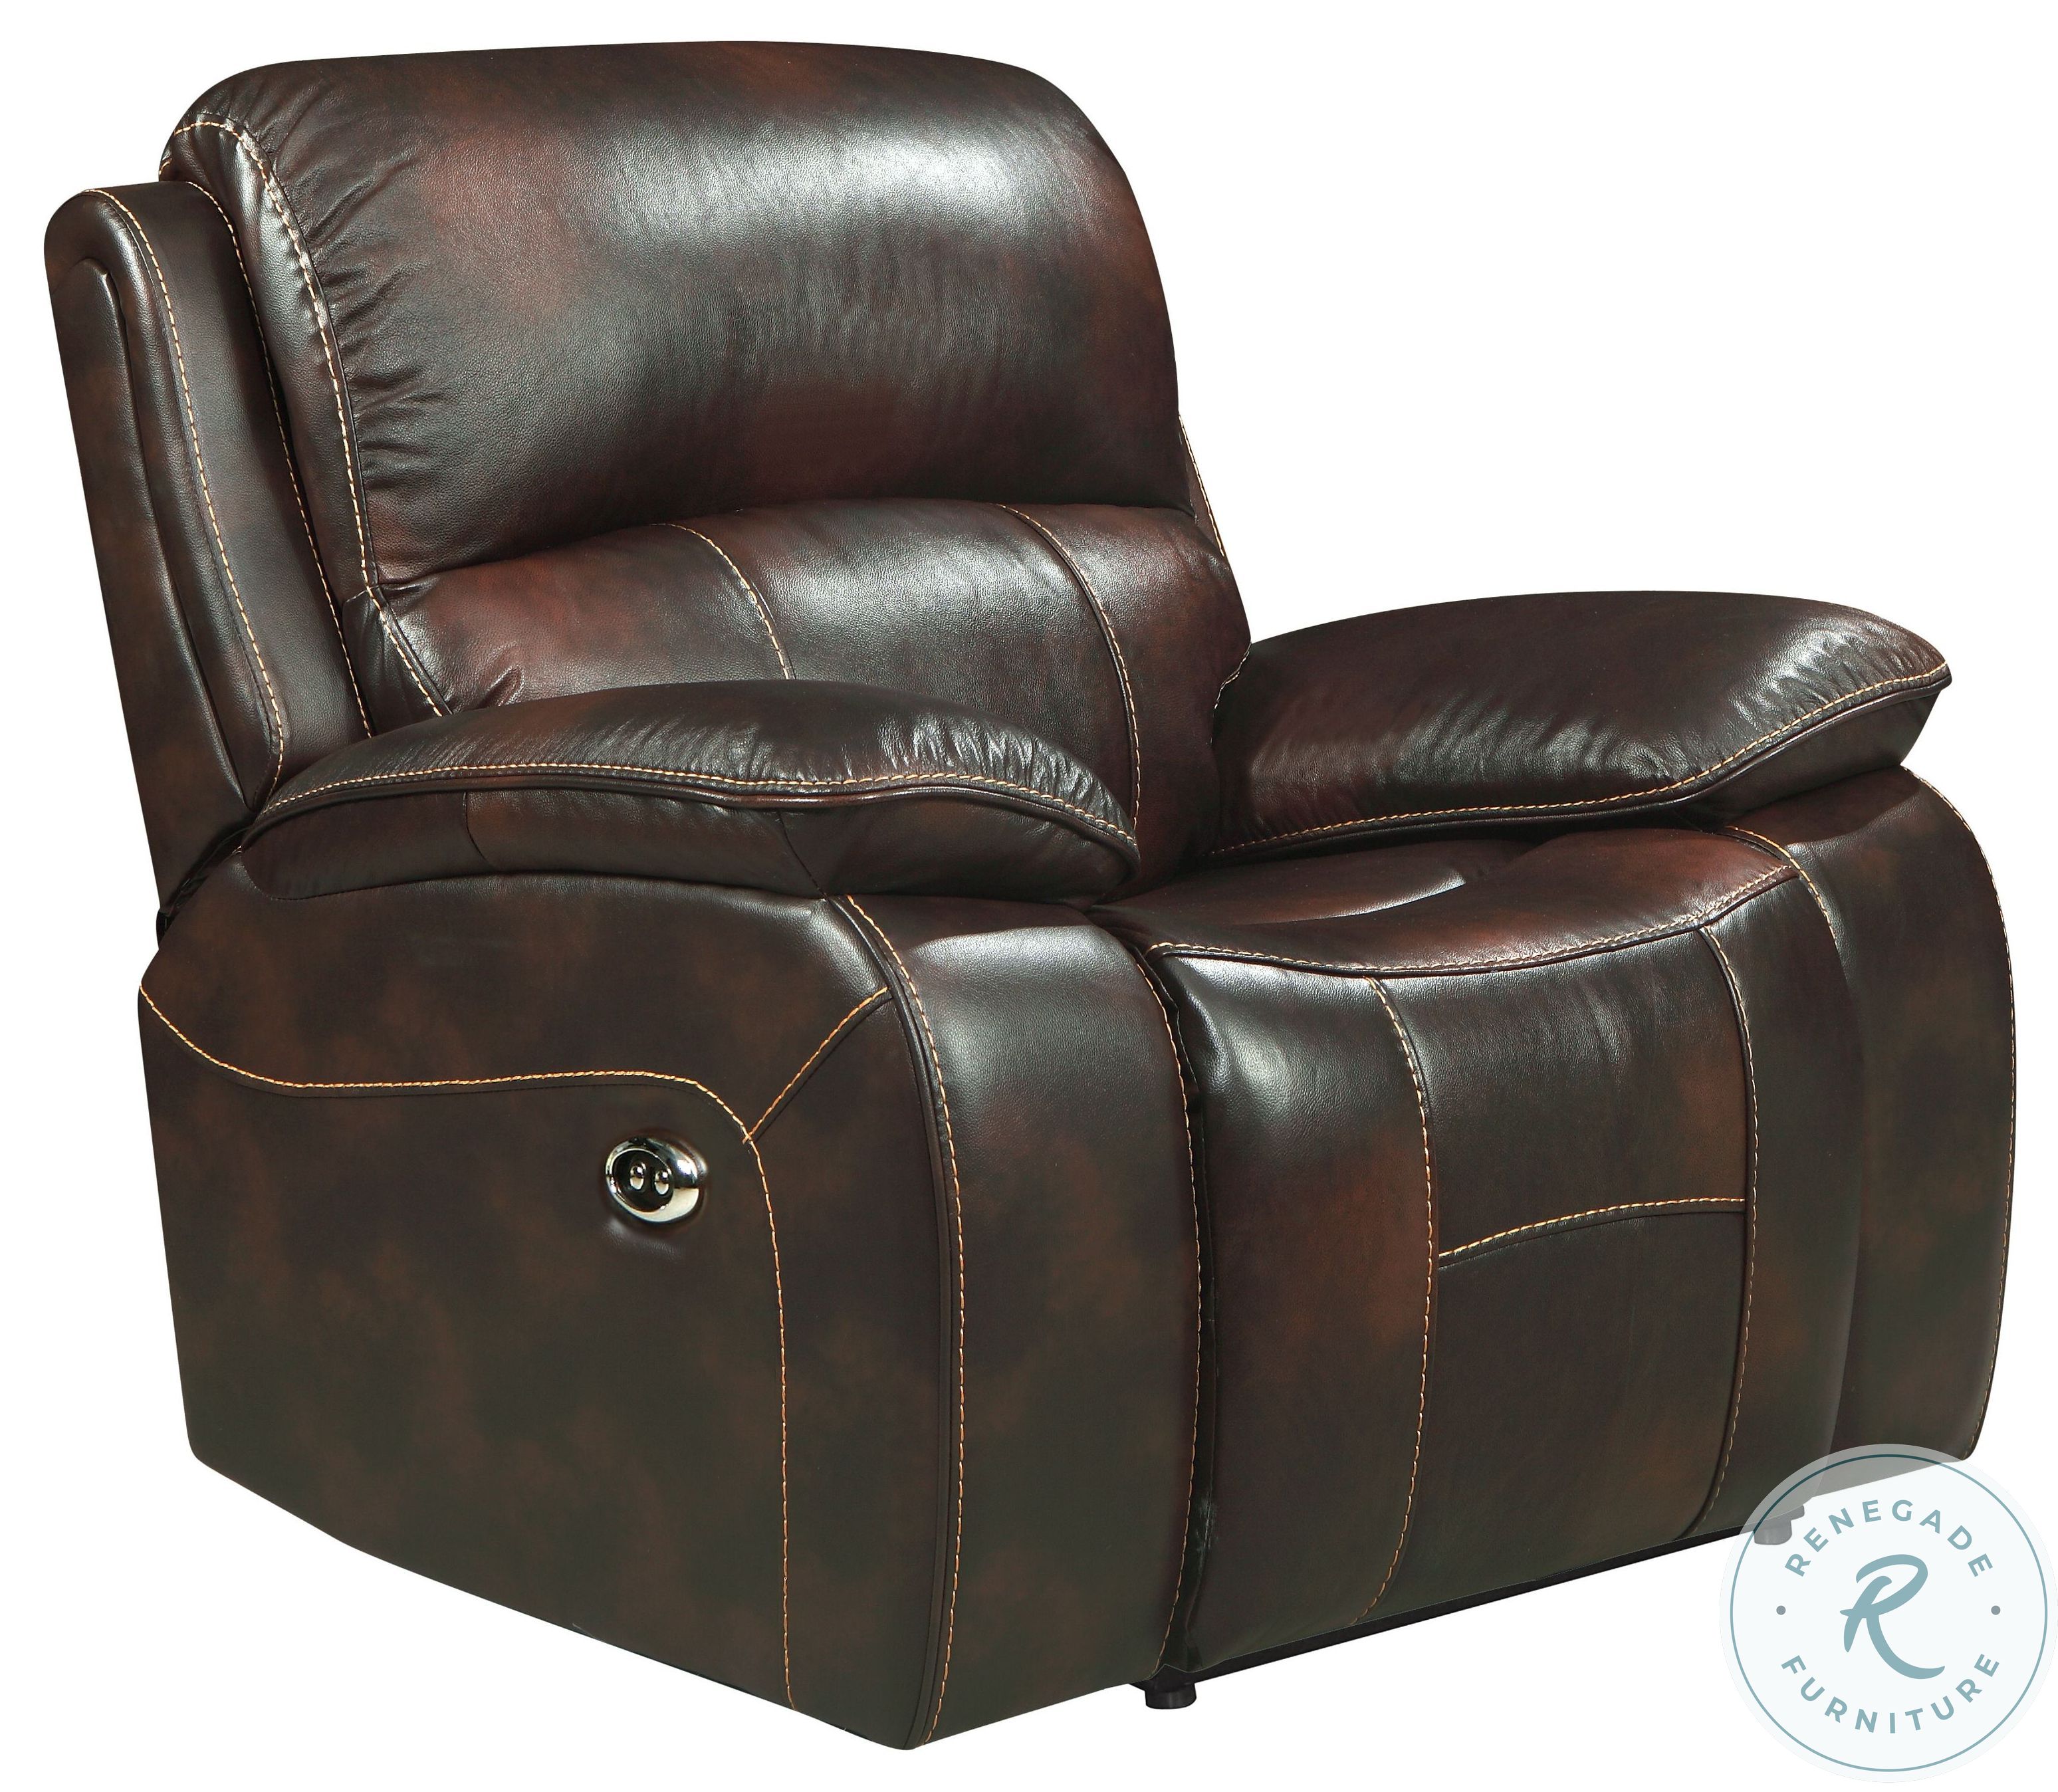 Mahala Brown Power Reclining Chair From, Dark Brown Leather Chair Recliner